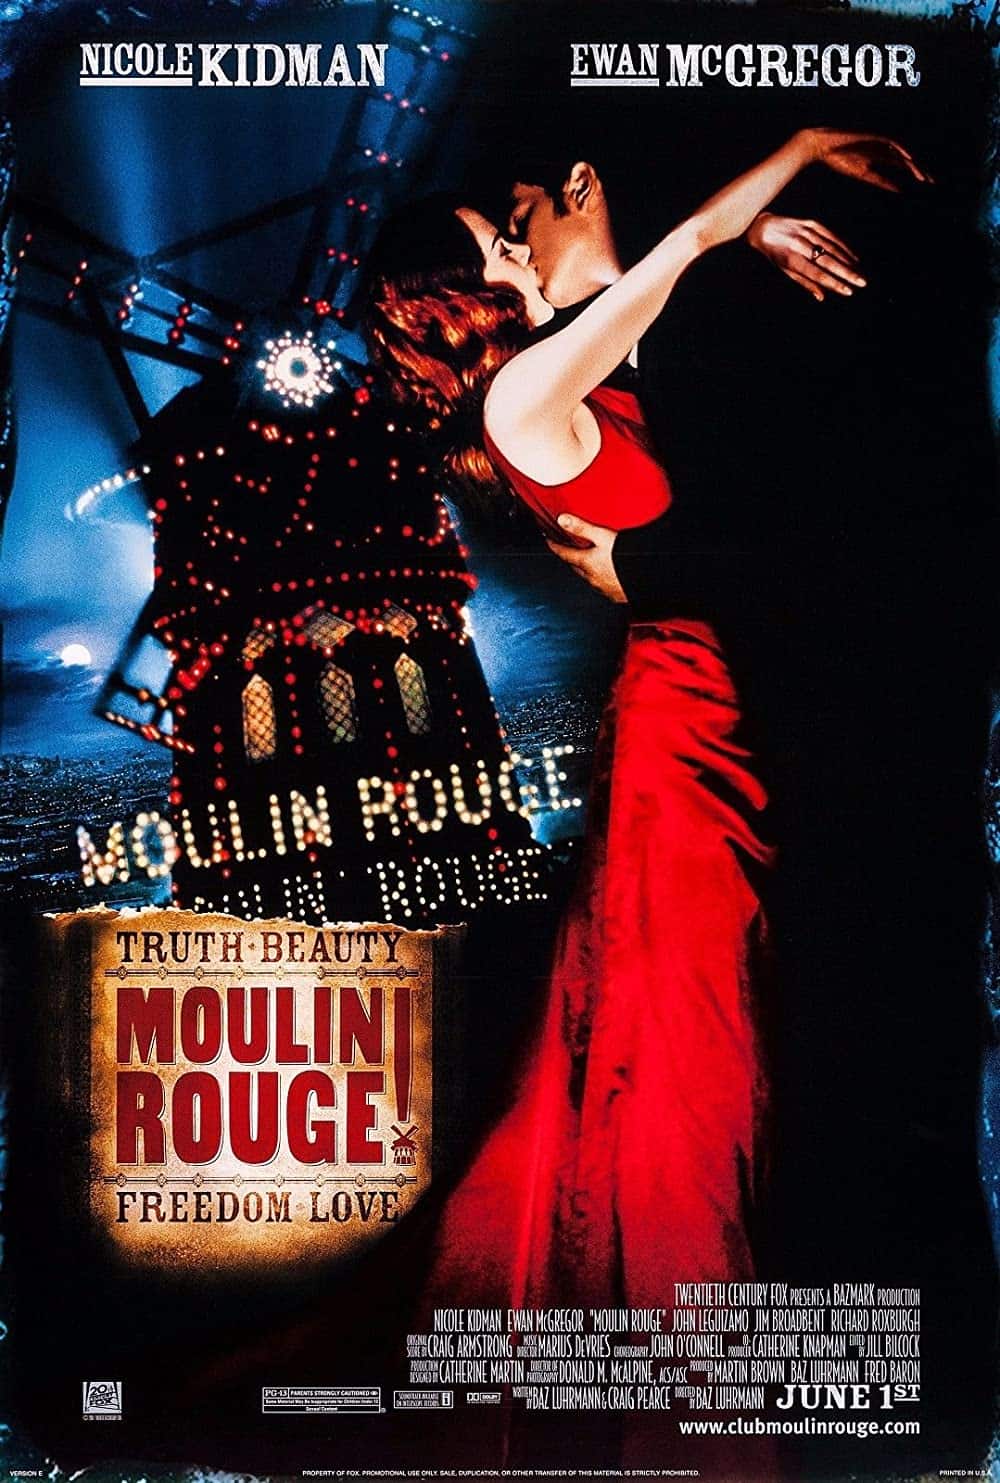 Moulin Rouge! (2001) Movie Poster